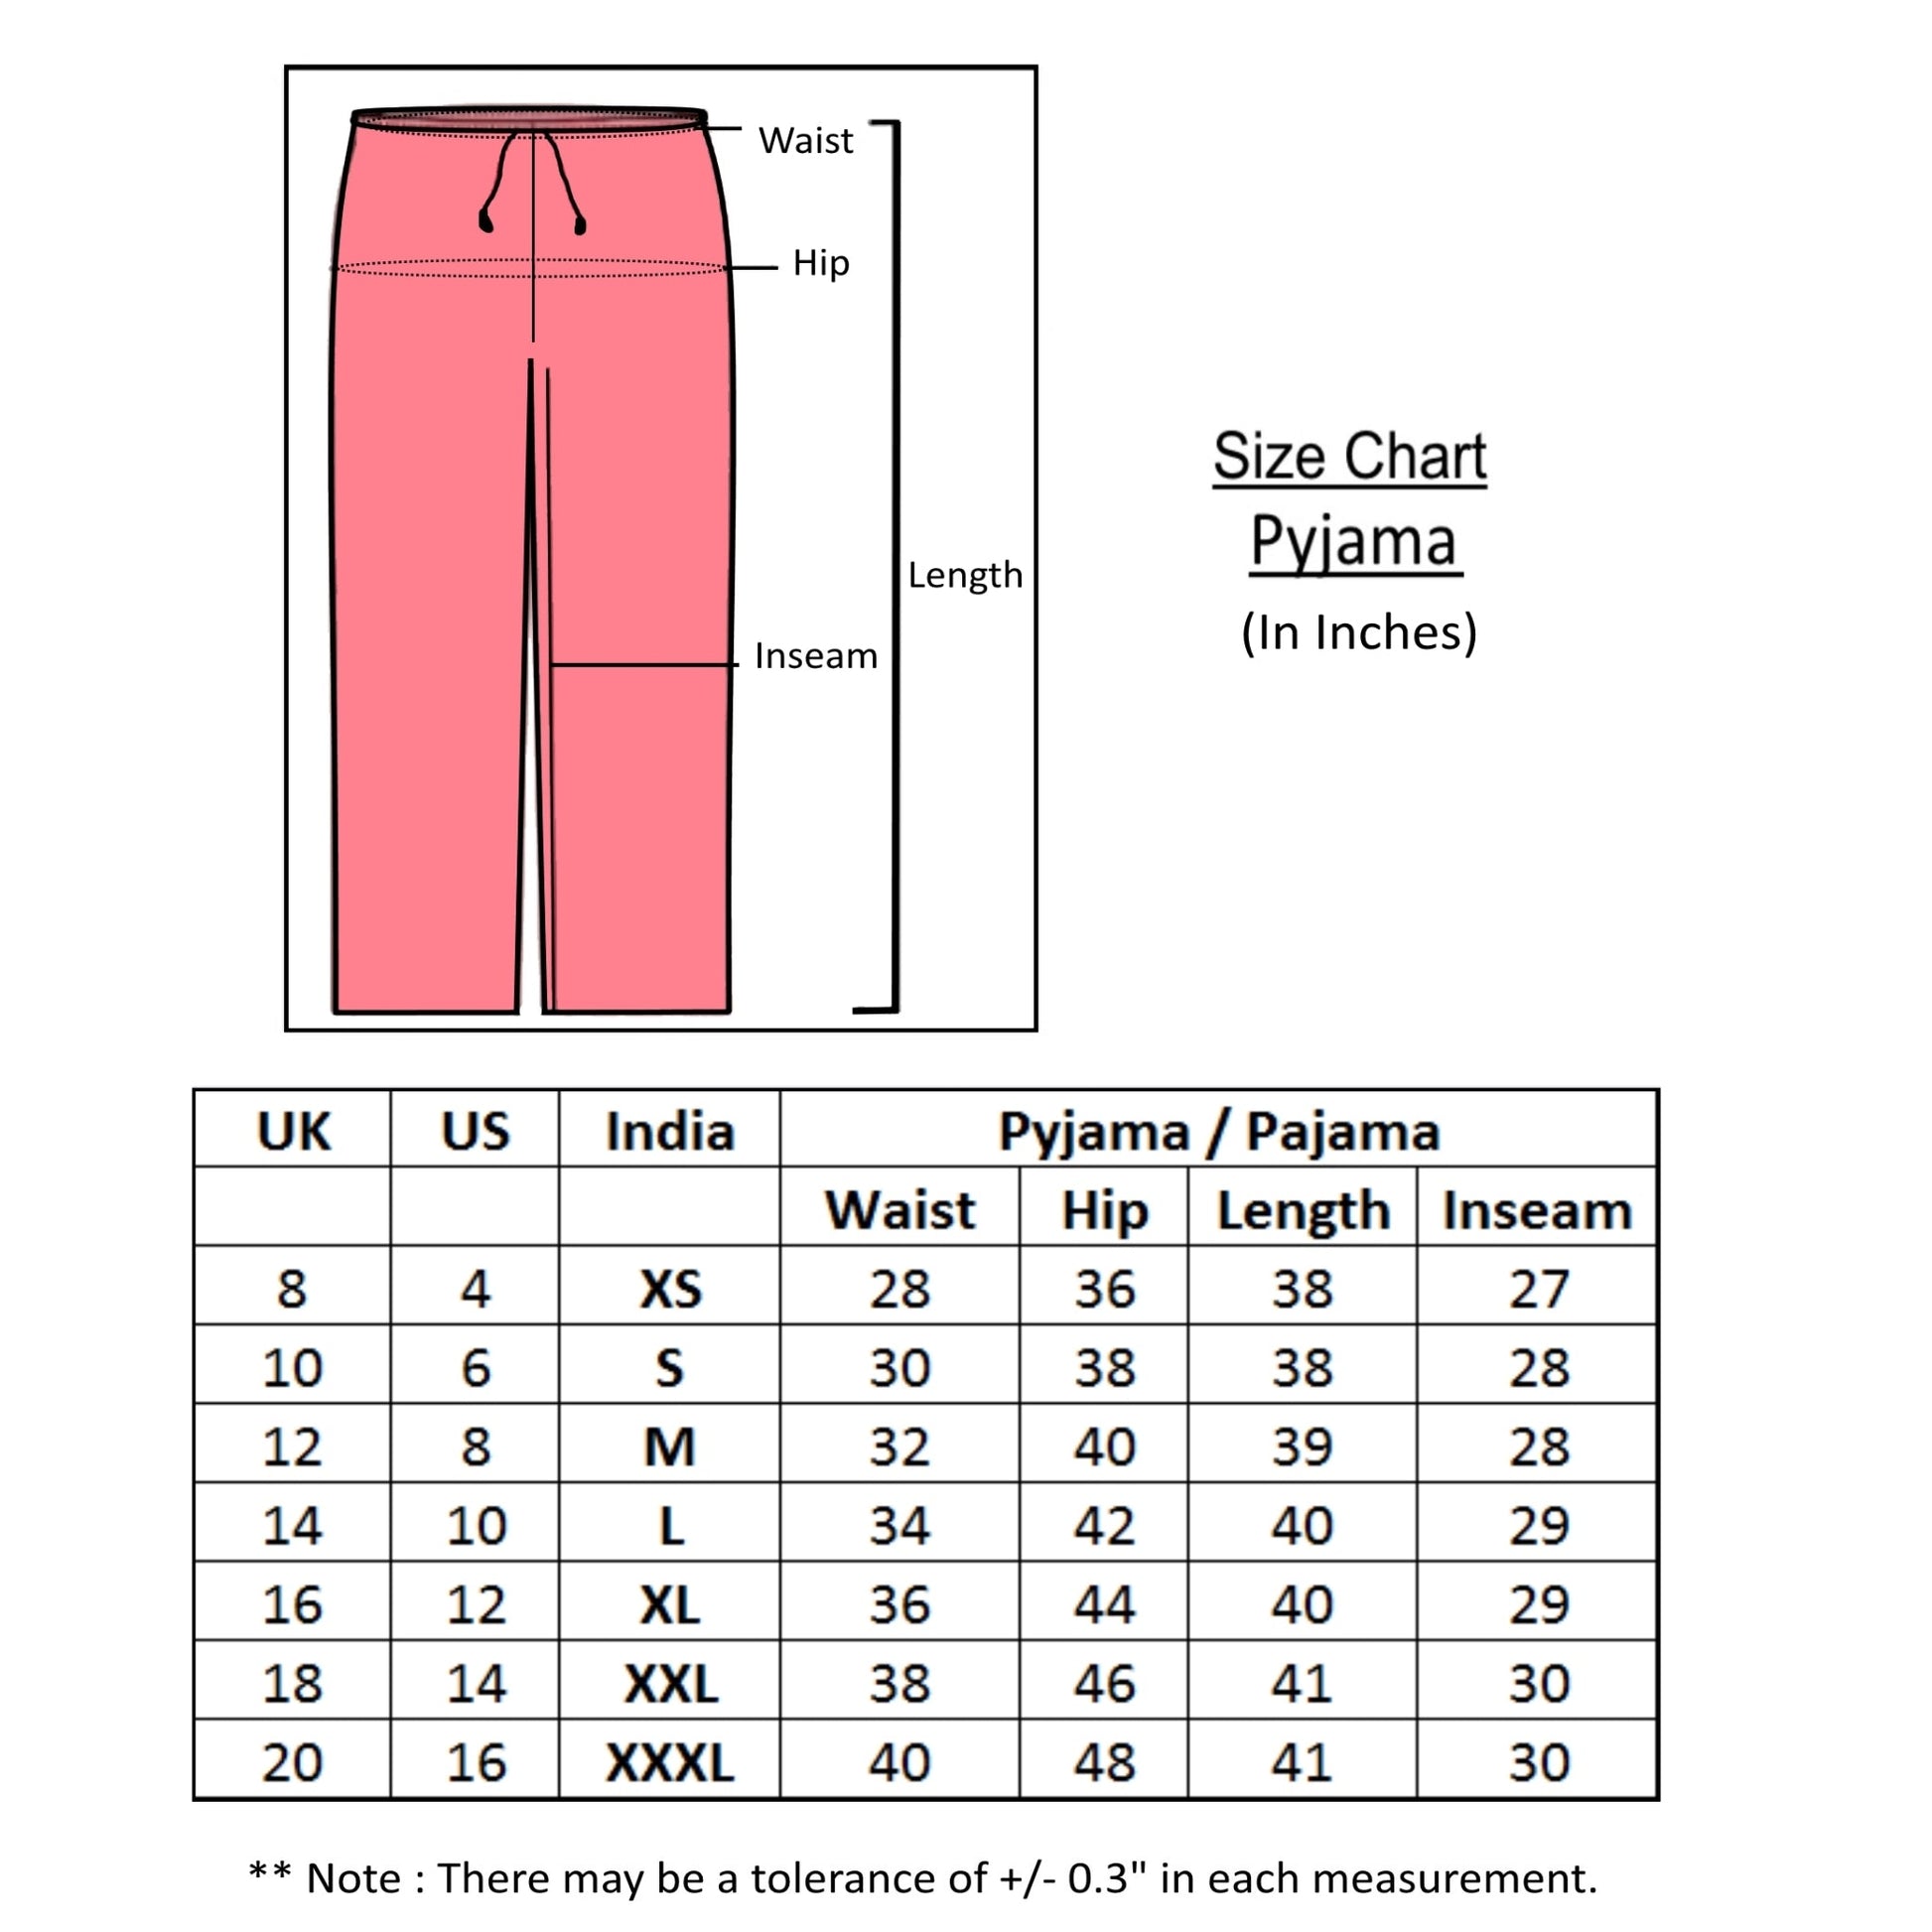 size chart for pyjama pants for women. Sizes available from small to 3xl